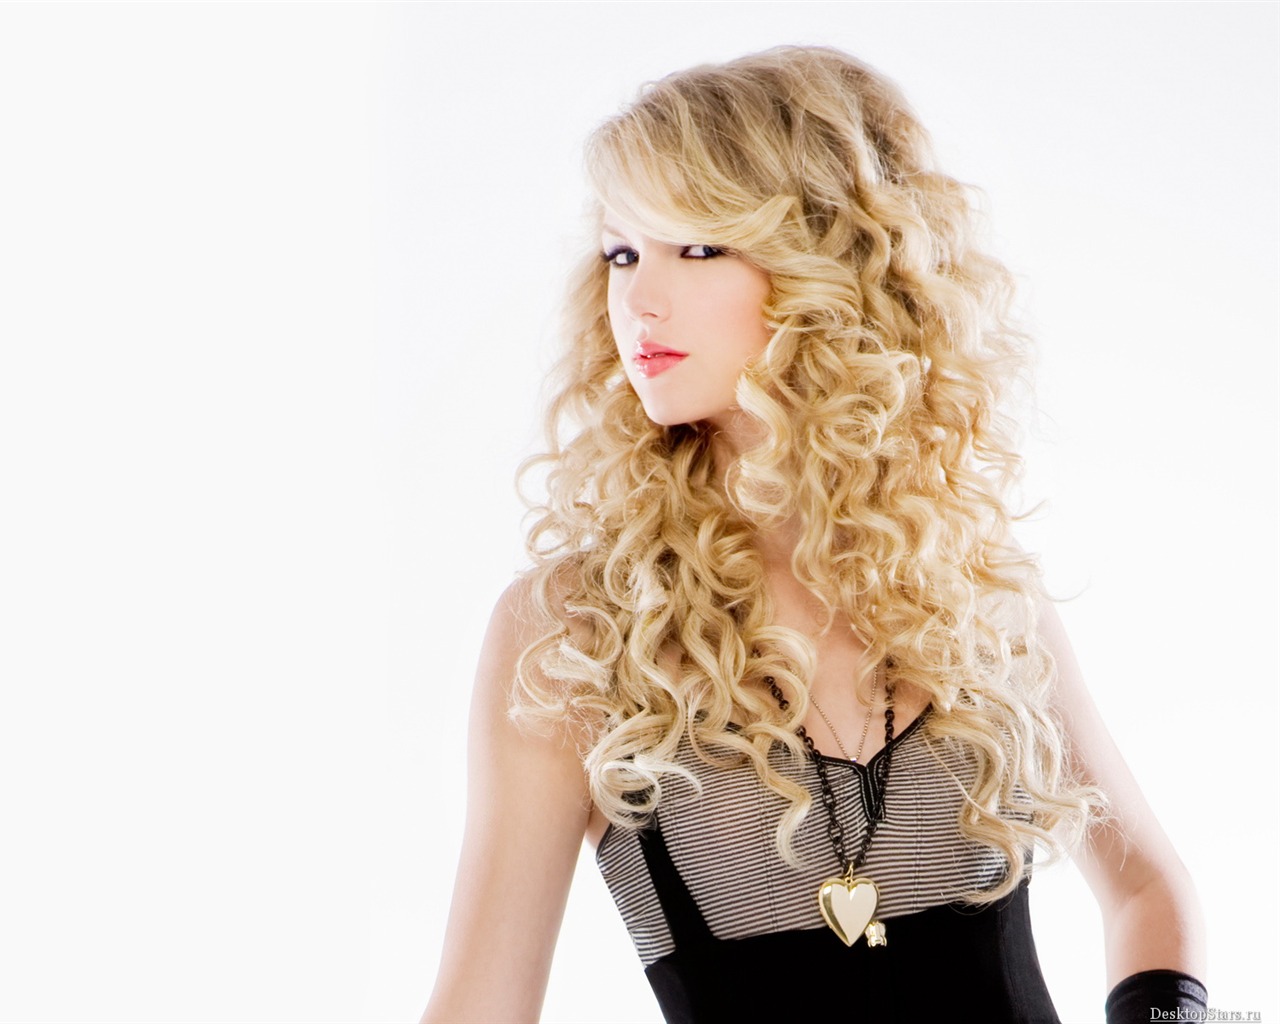 Taylor Swift #011 - 1280x1024 Wallpapers Pictures Photos Images